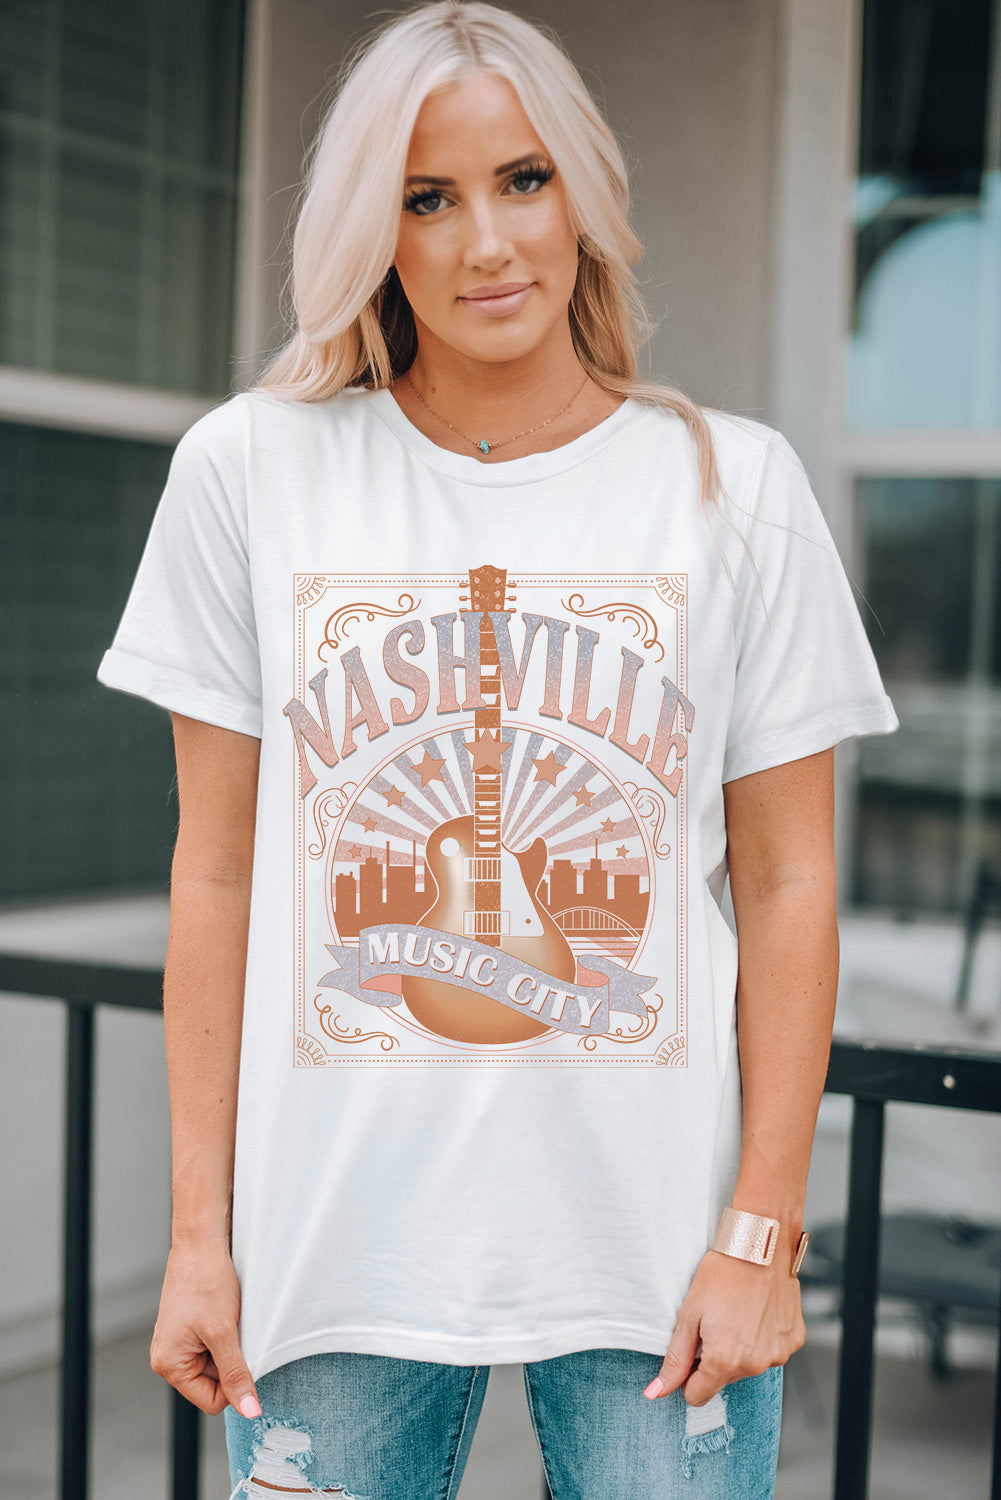 NASHVILLE MUSIC CITY Graphic T-Shirt - Online Only